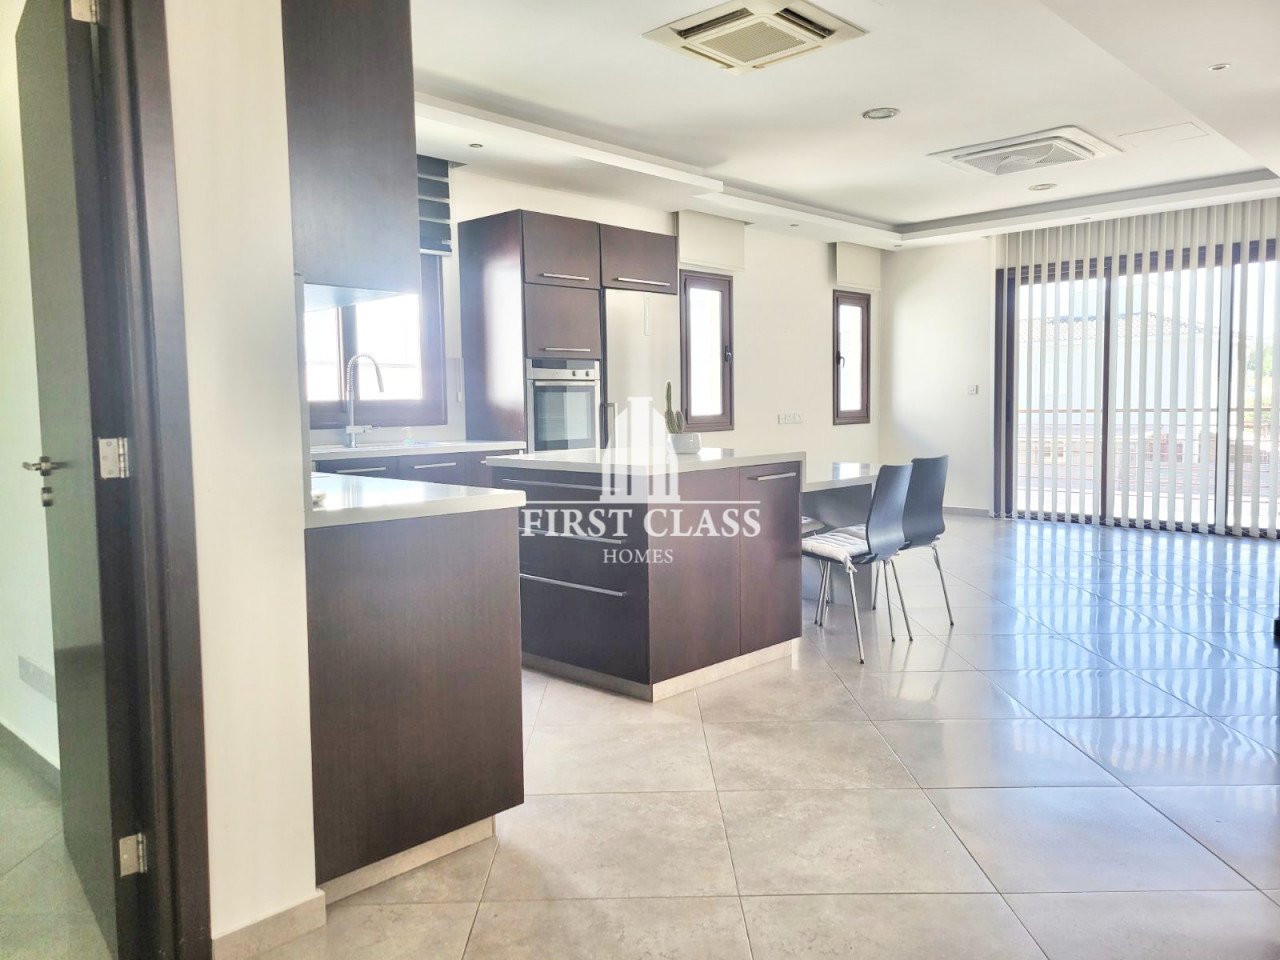 Property for Rent: Upper House (Flat) in Strovolos, Nicosia for Rent | Key Realtor Cyprus